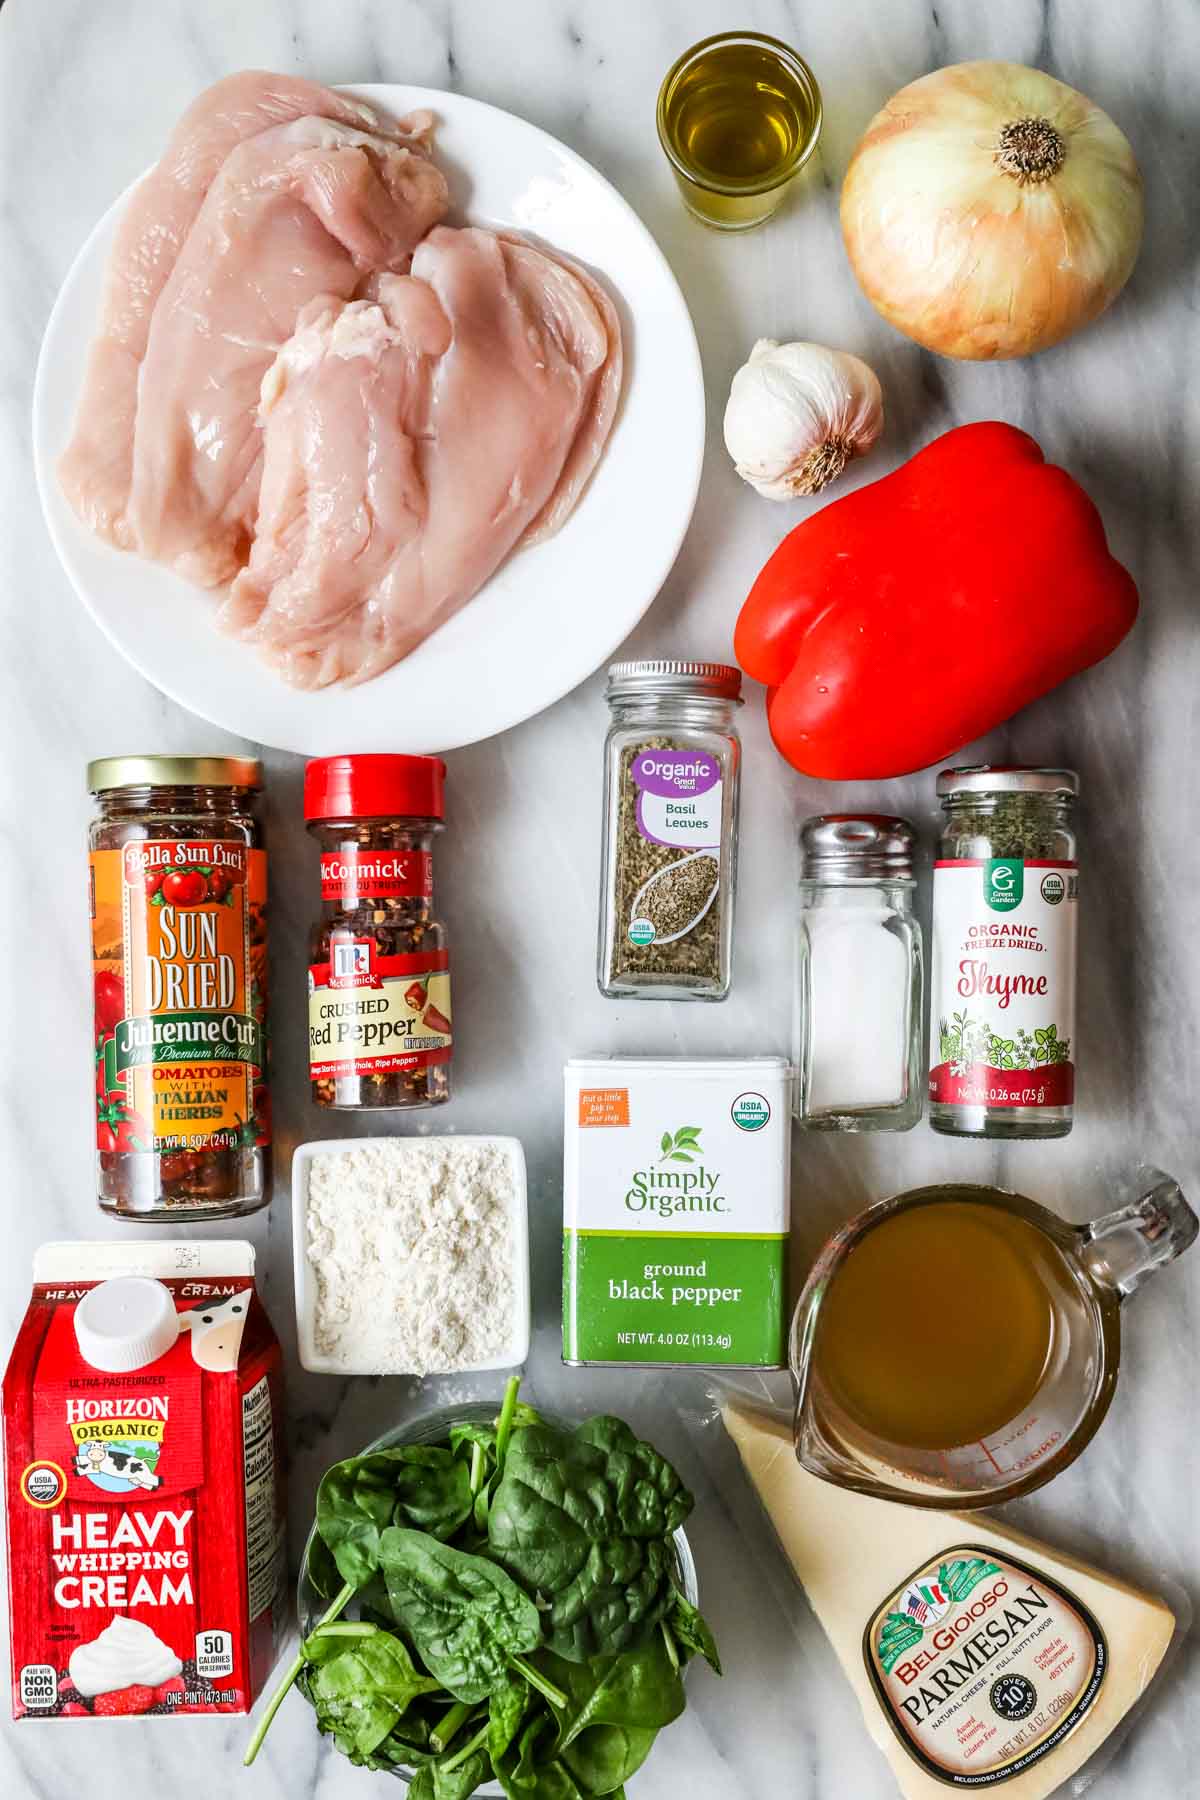 Overhead view of ingredients including chicken breasts, sun dried tomatoes, cream, spinach, and more.